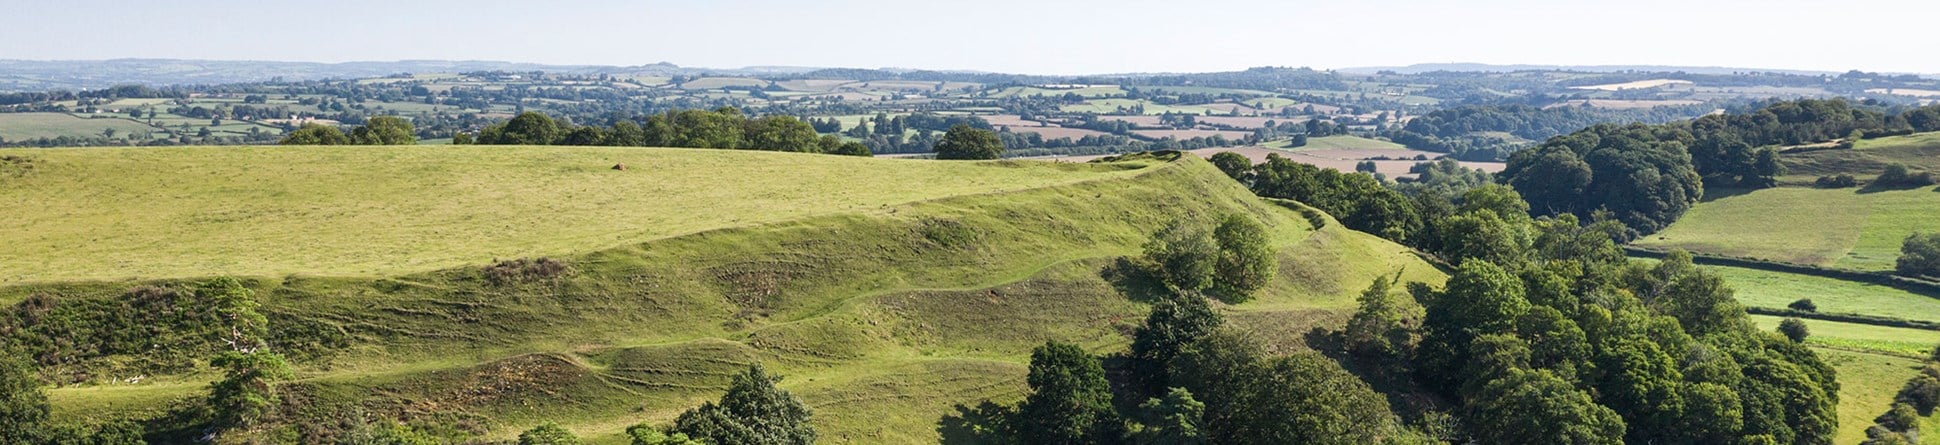 Aerial view of hill fort surrounded by trees.